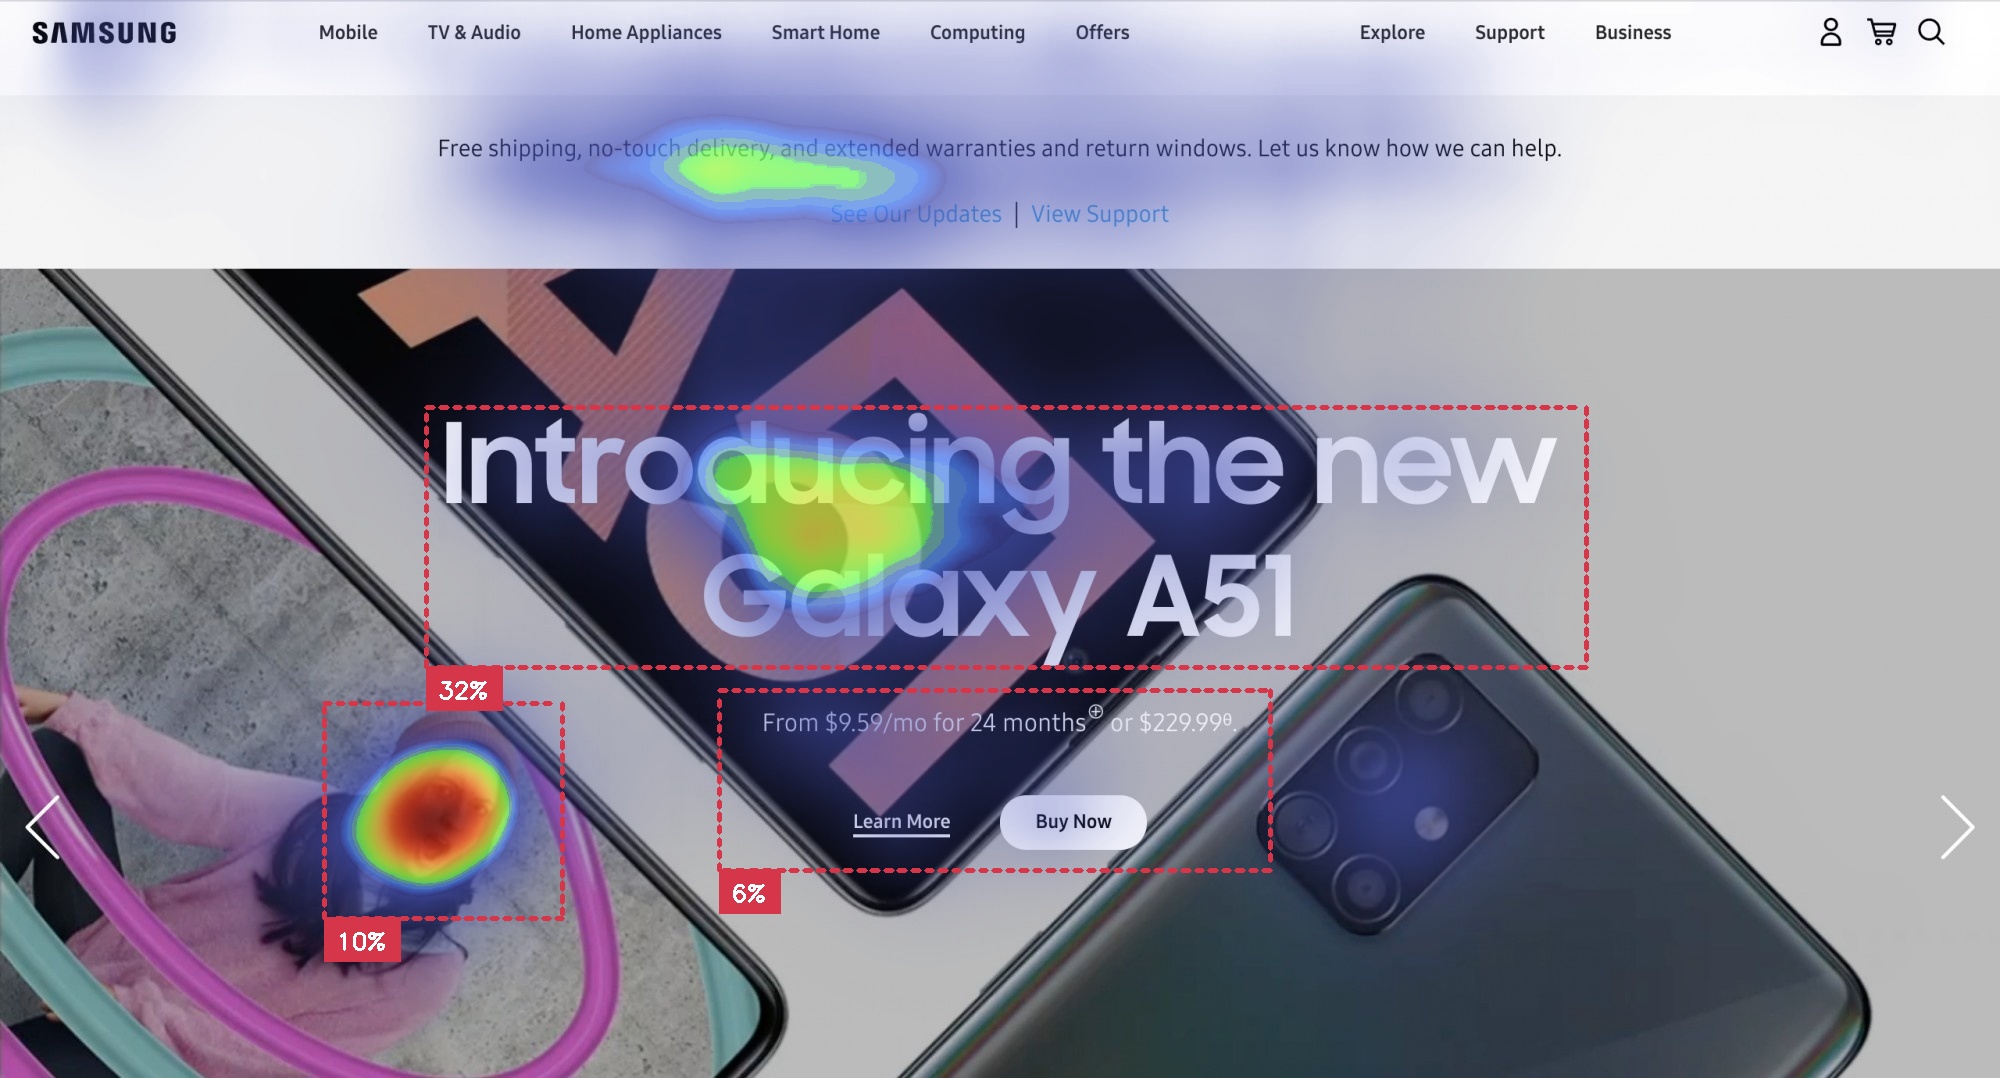 Samsung landing page with Galaxy A51 and main message with buttons with attention insight heatmap